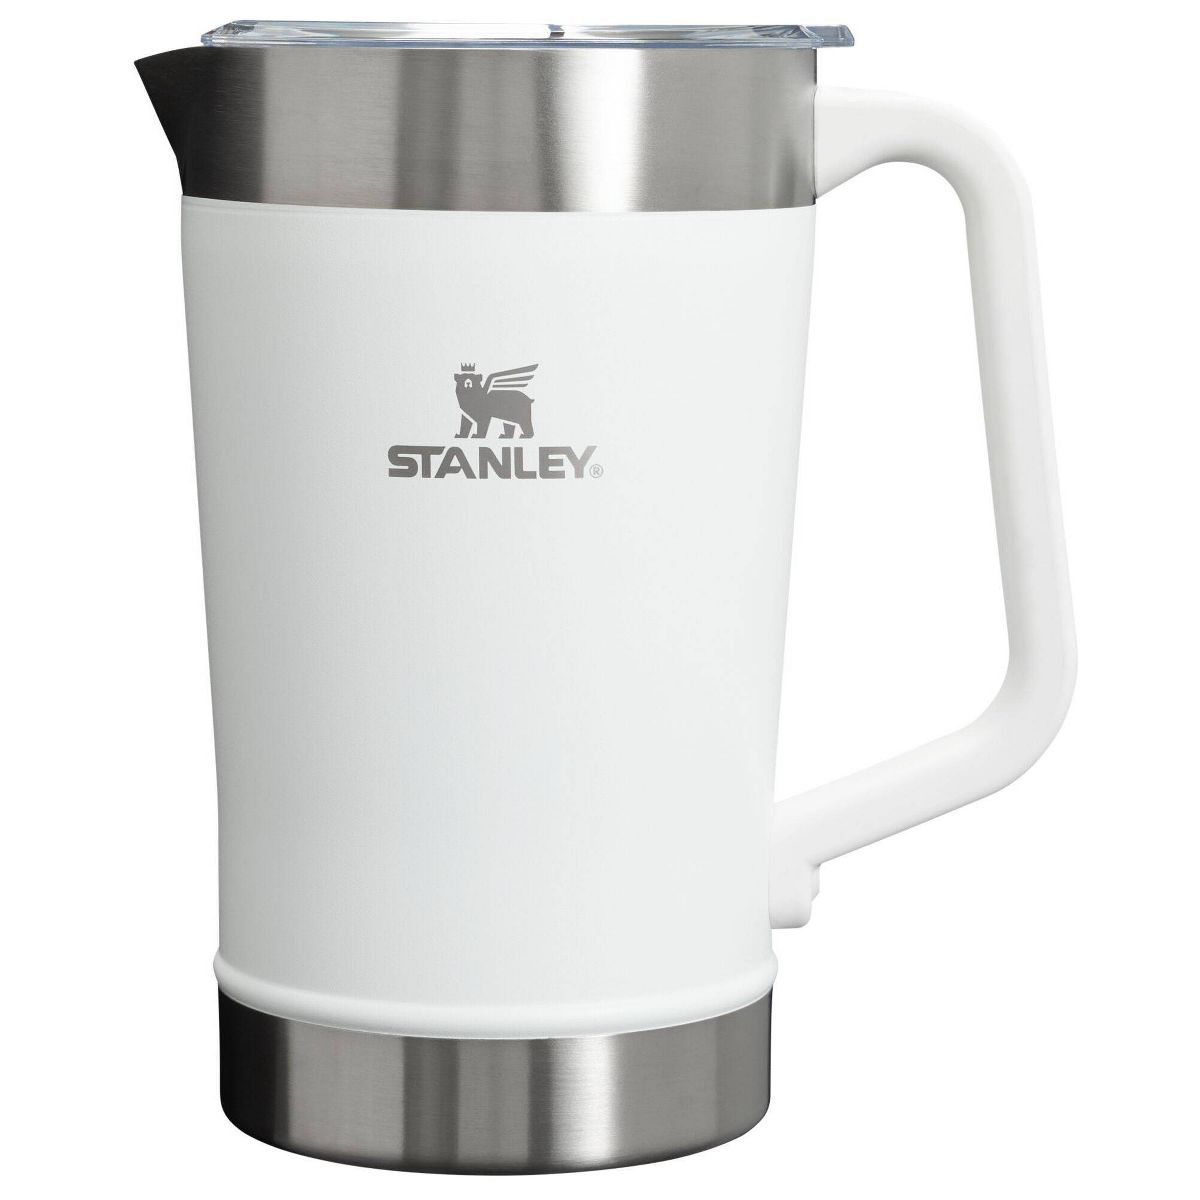 Stanley 64 oz Stainless Steel Stay-Chill Pitcher Sunshine | Target